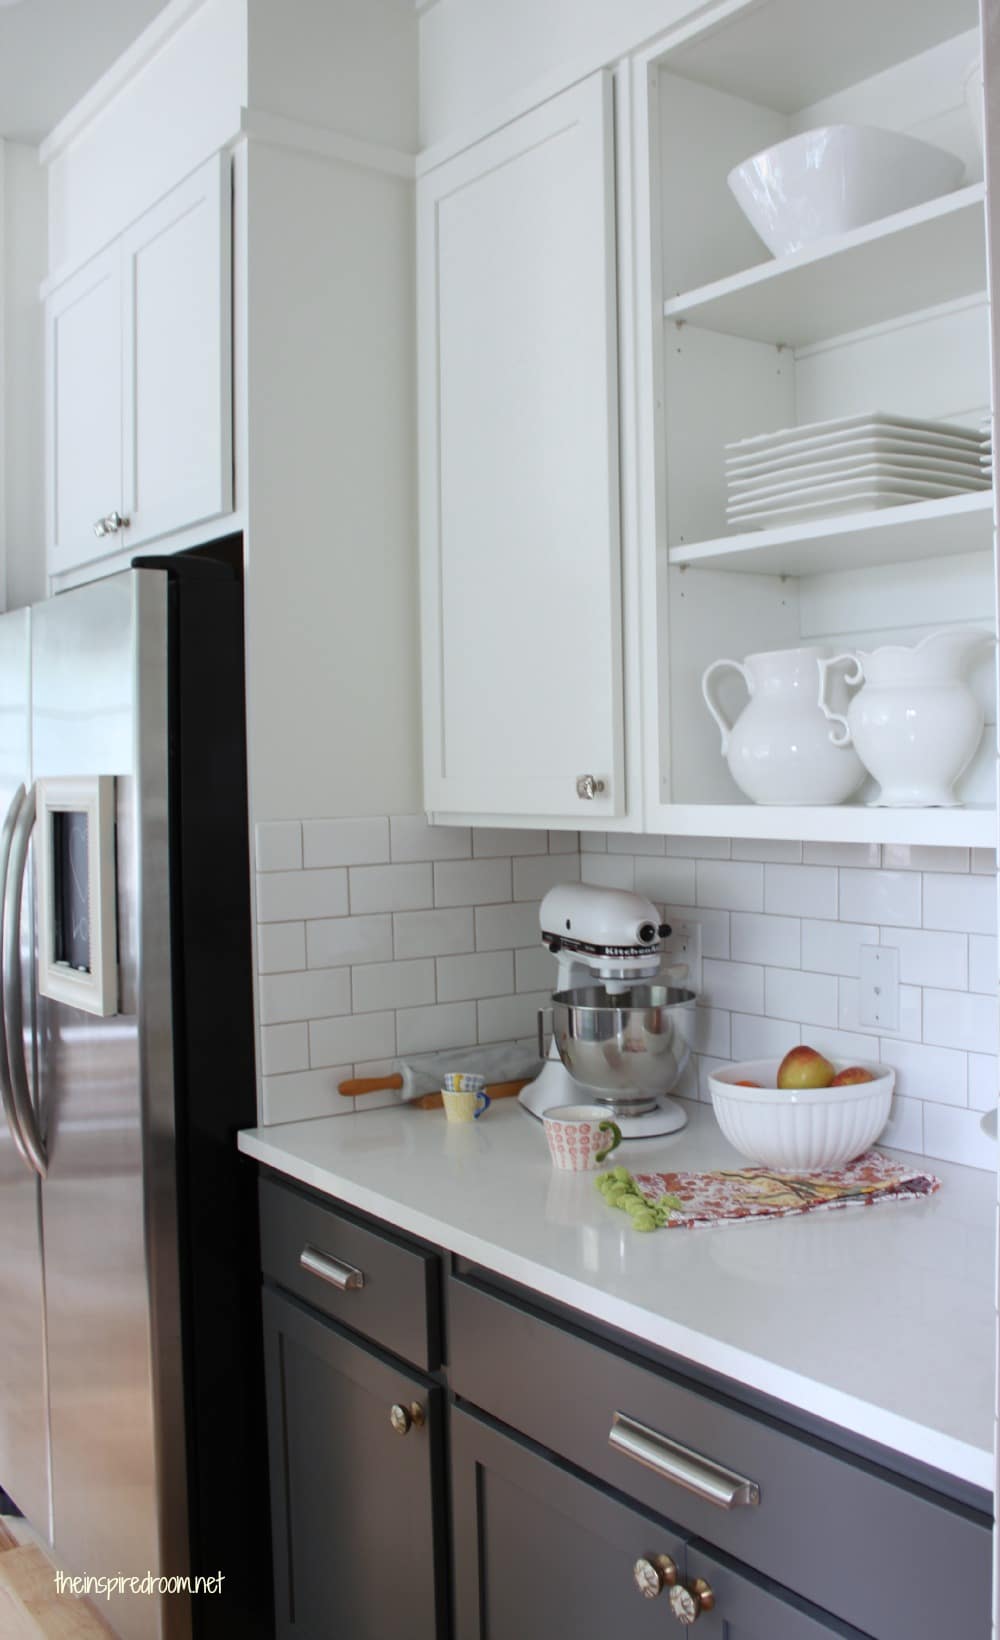 My Kitchen Cabinet Colors {Before & After Cabinets!} - The 